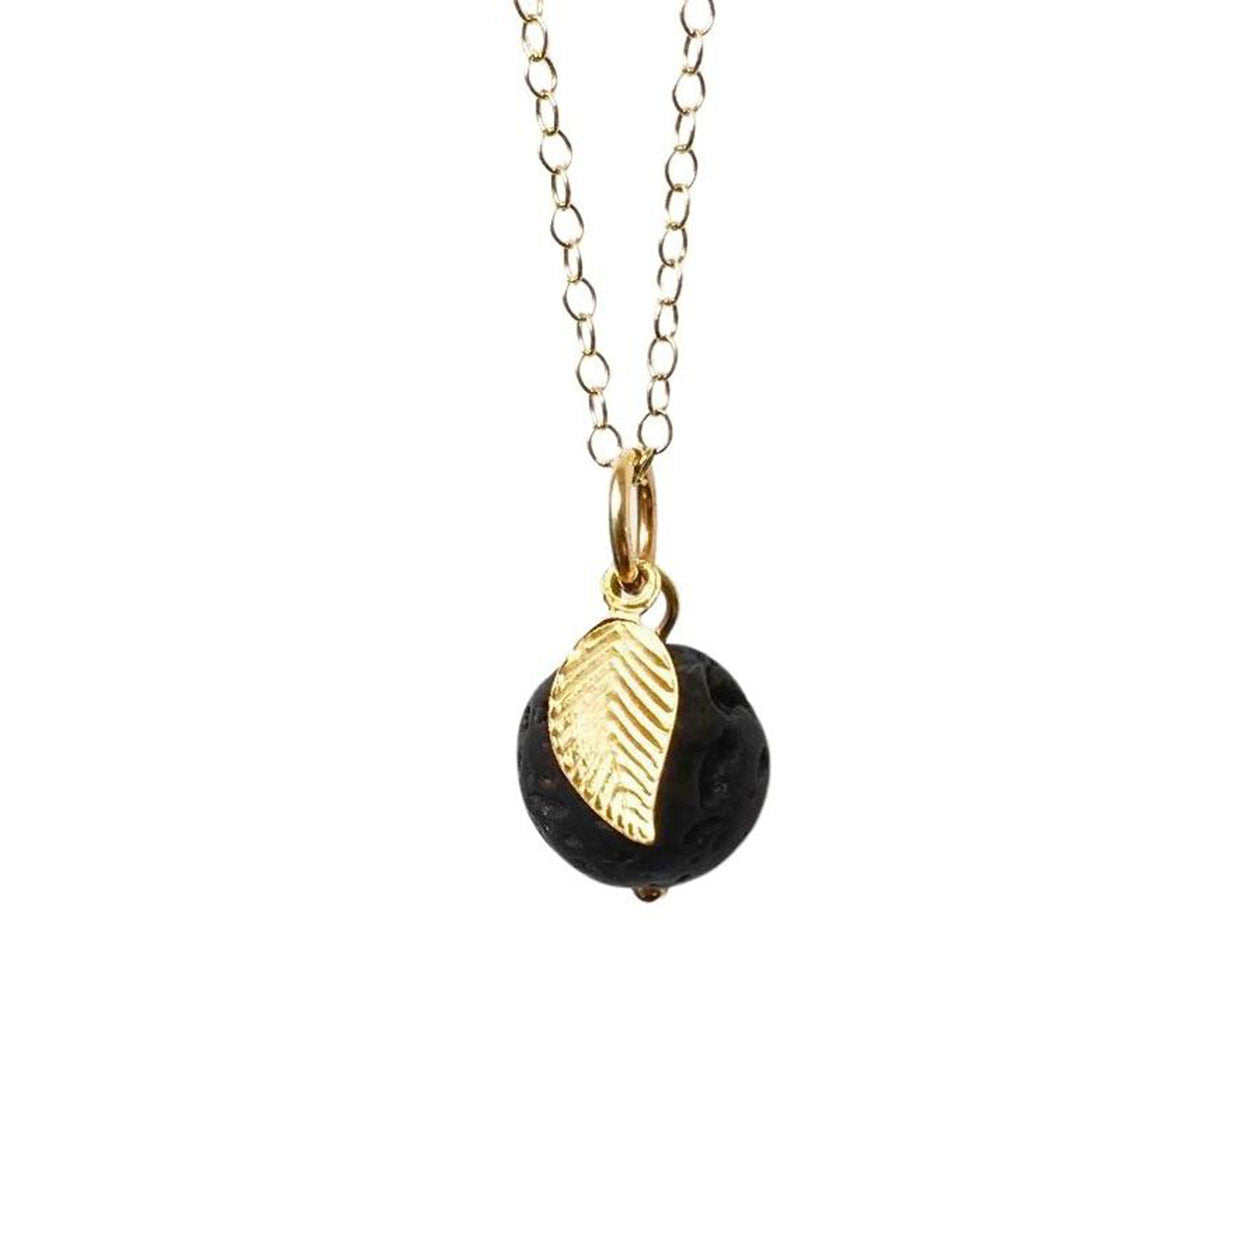 A round lava stone and golf leaf pendant attached to a gold chain